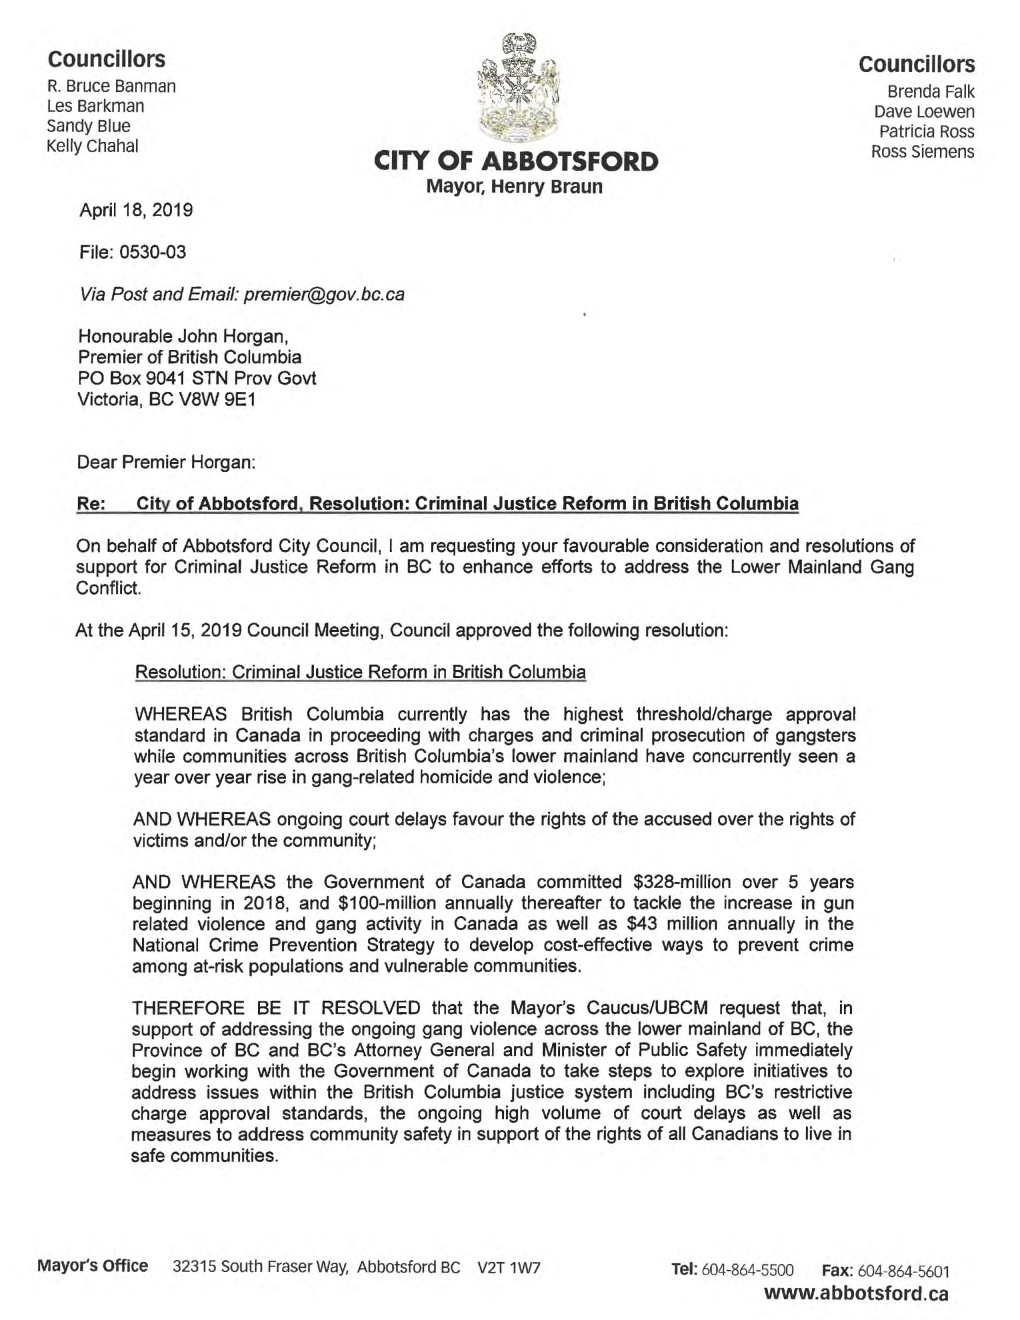 City of Abbotsford, Resolution: Criminal Justice Reform in British Columbia